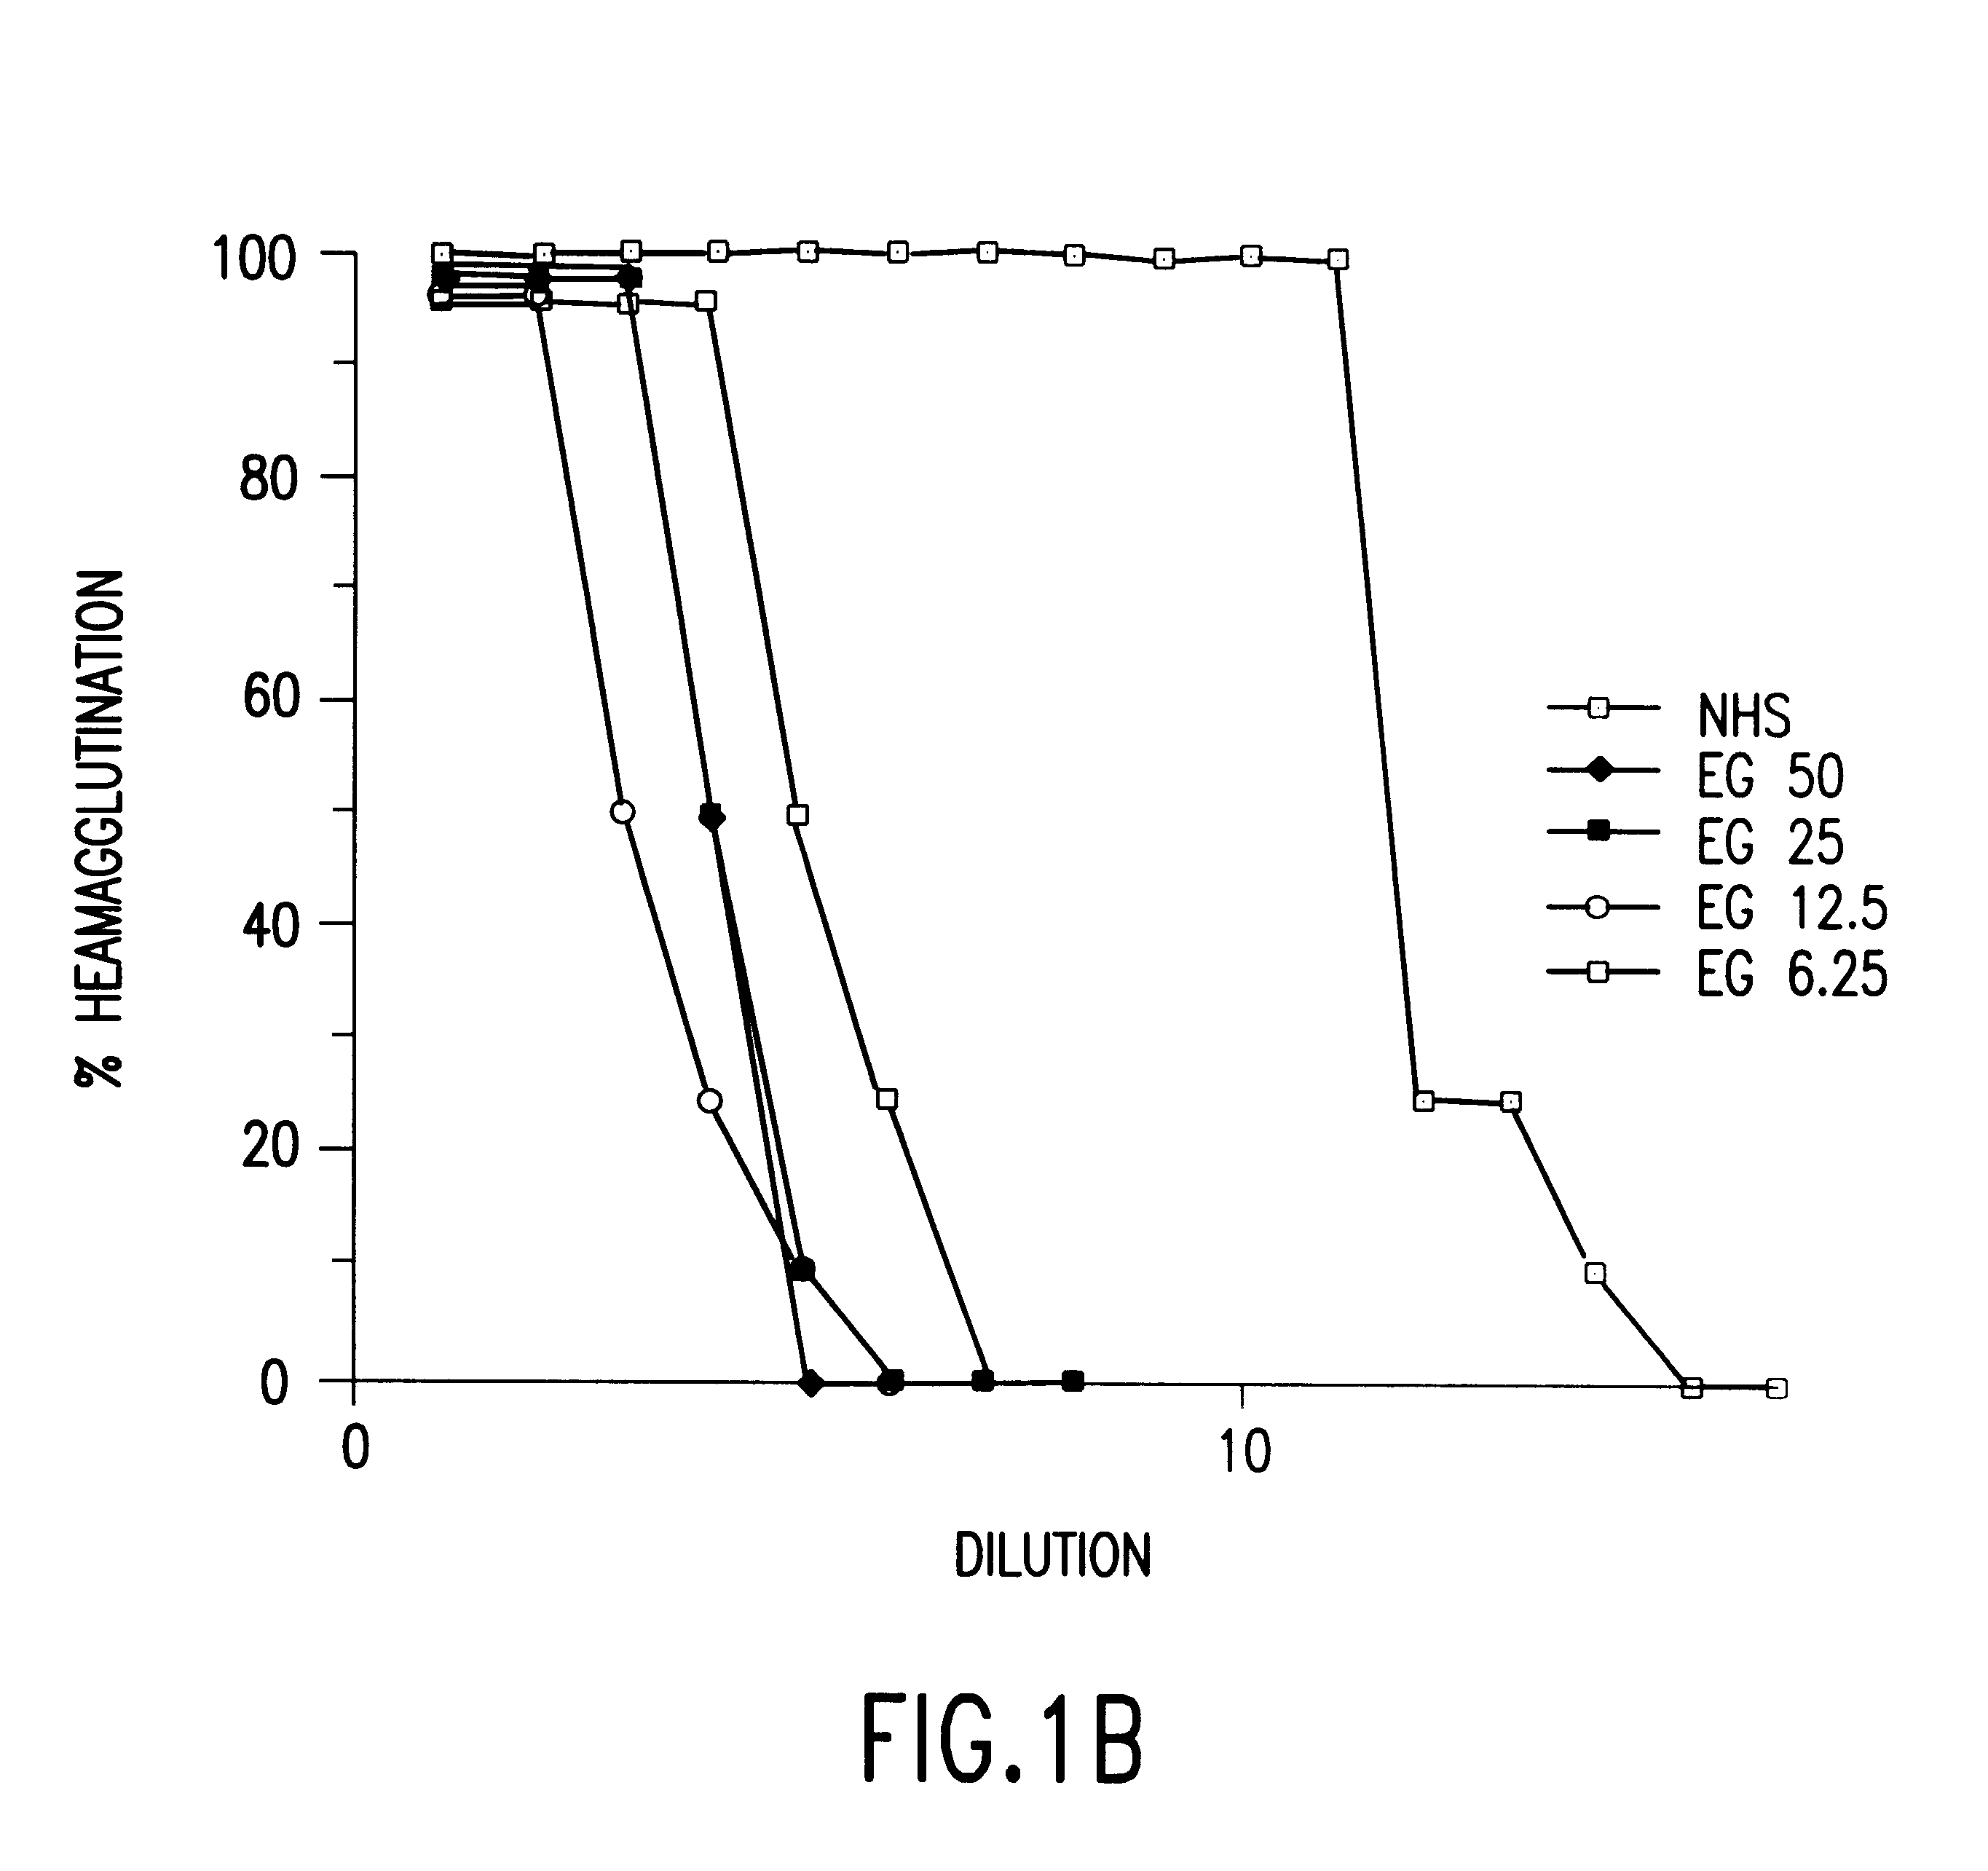 Cells expressing an alphagala nucleic acid and methods of xenotransplantation